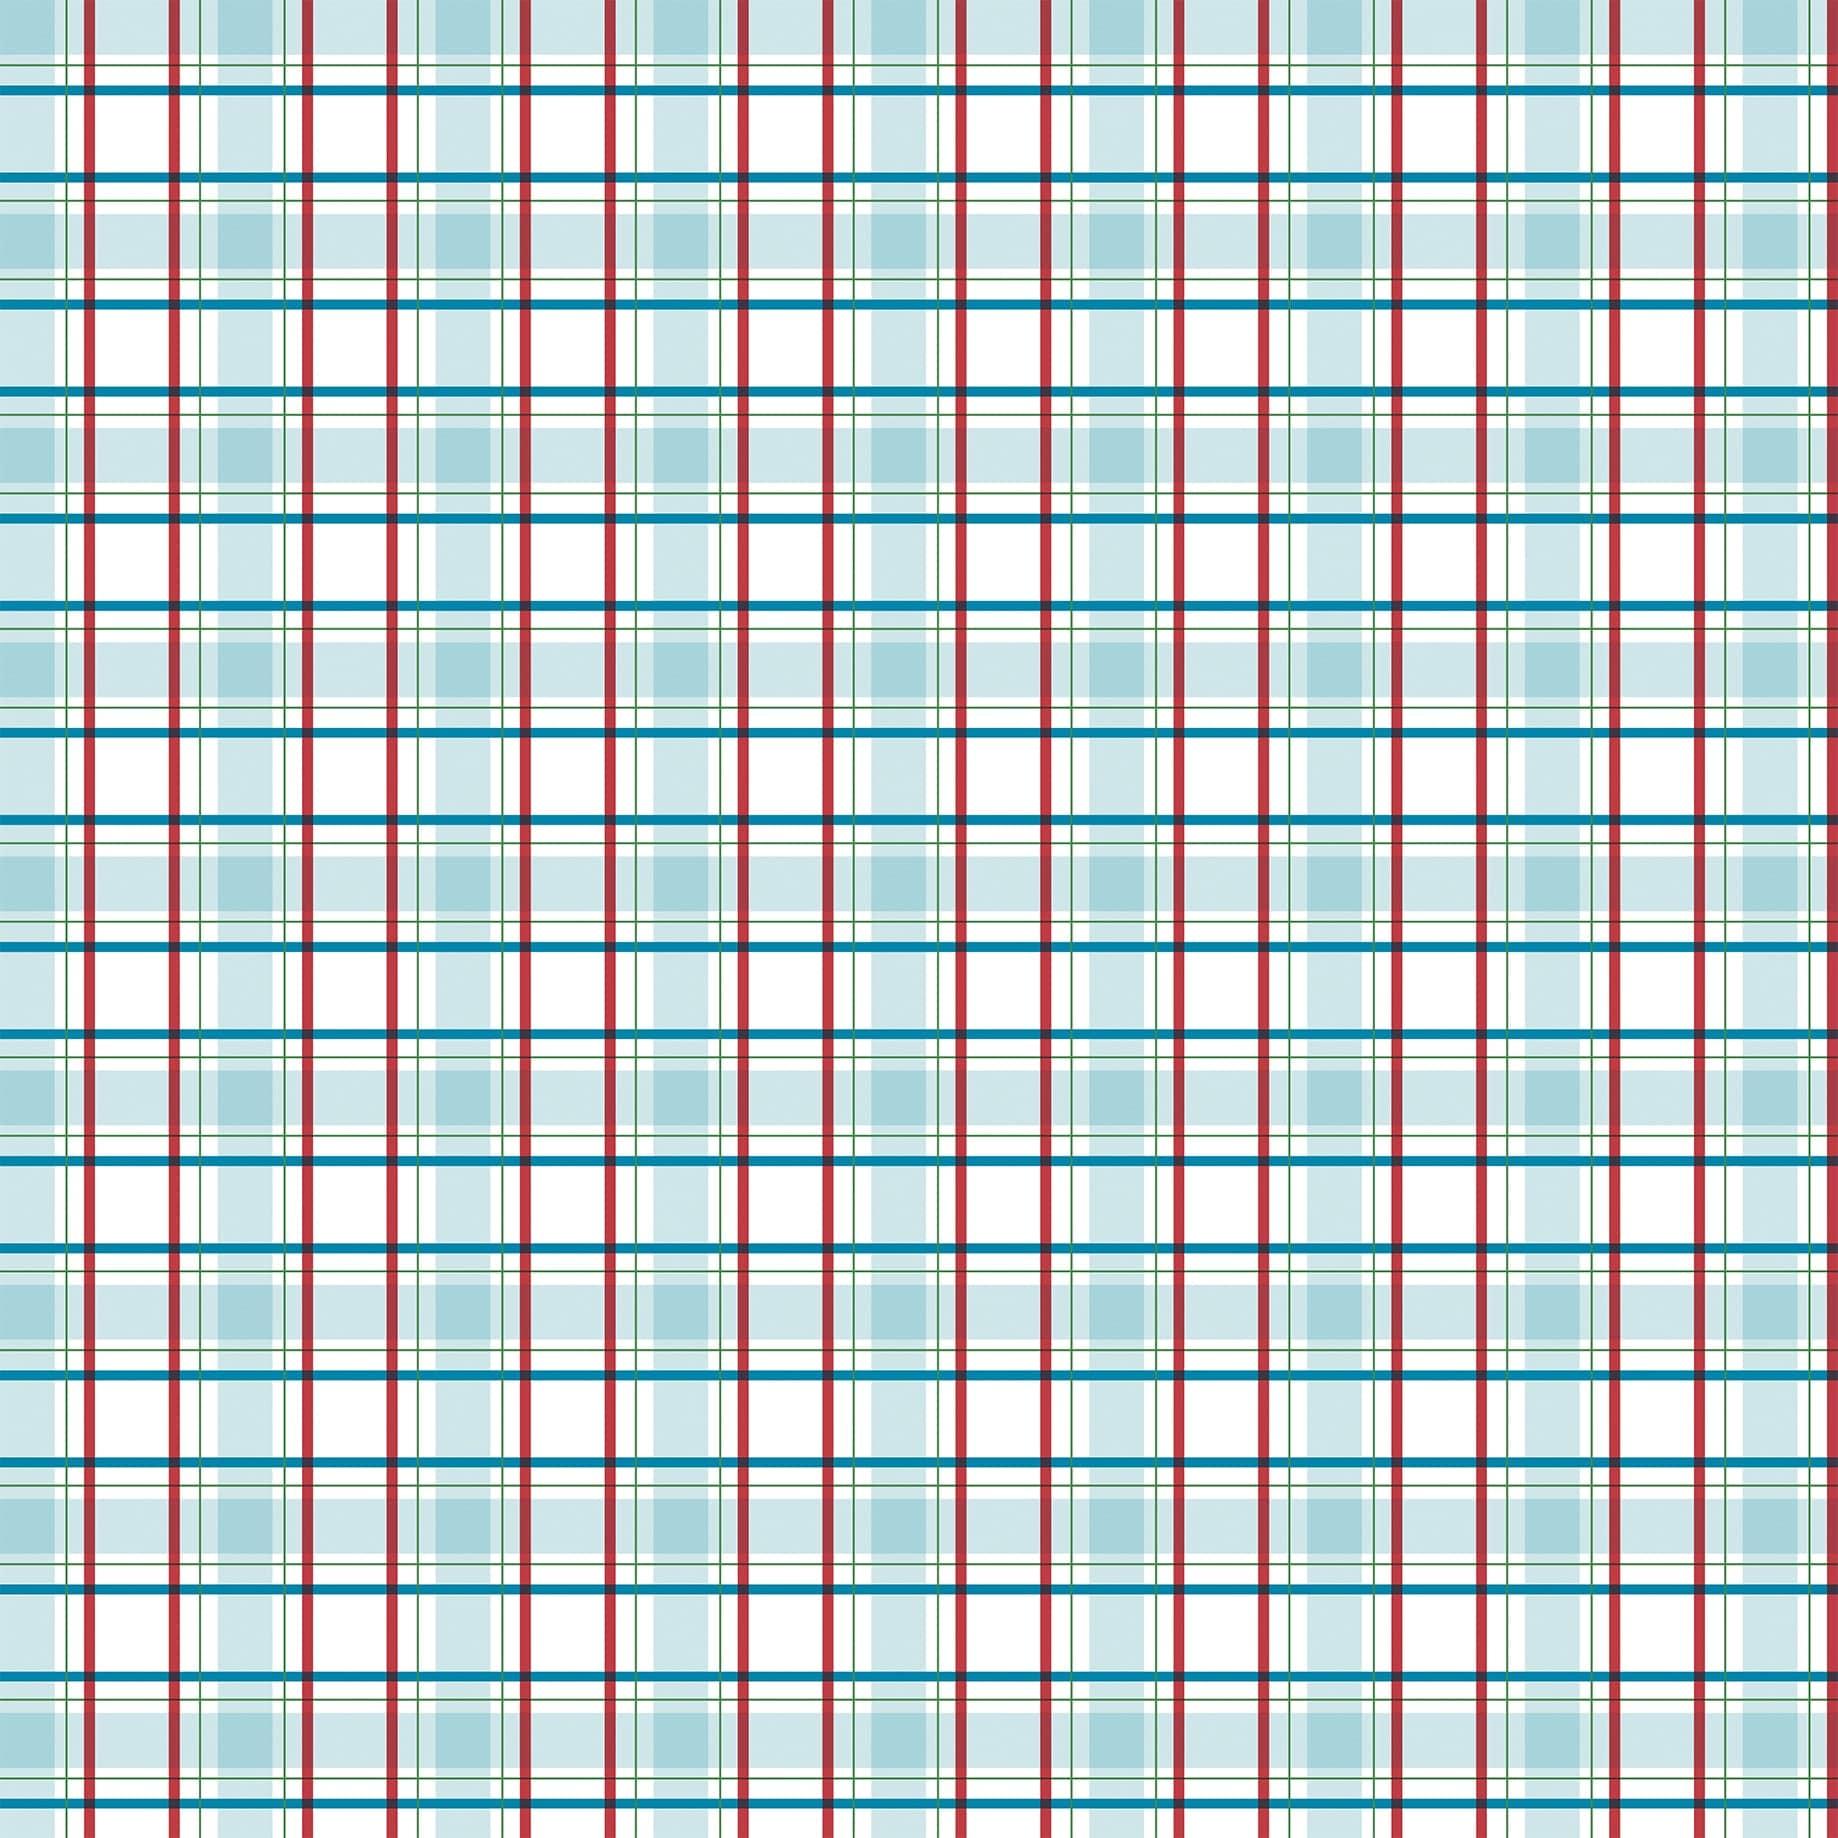 Play All Day Boy Collection Construction Zone 12 x 12 Double-Sided Scrapbook Paper by Echo Park Paper - Scrapbook Supply Companies